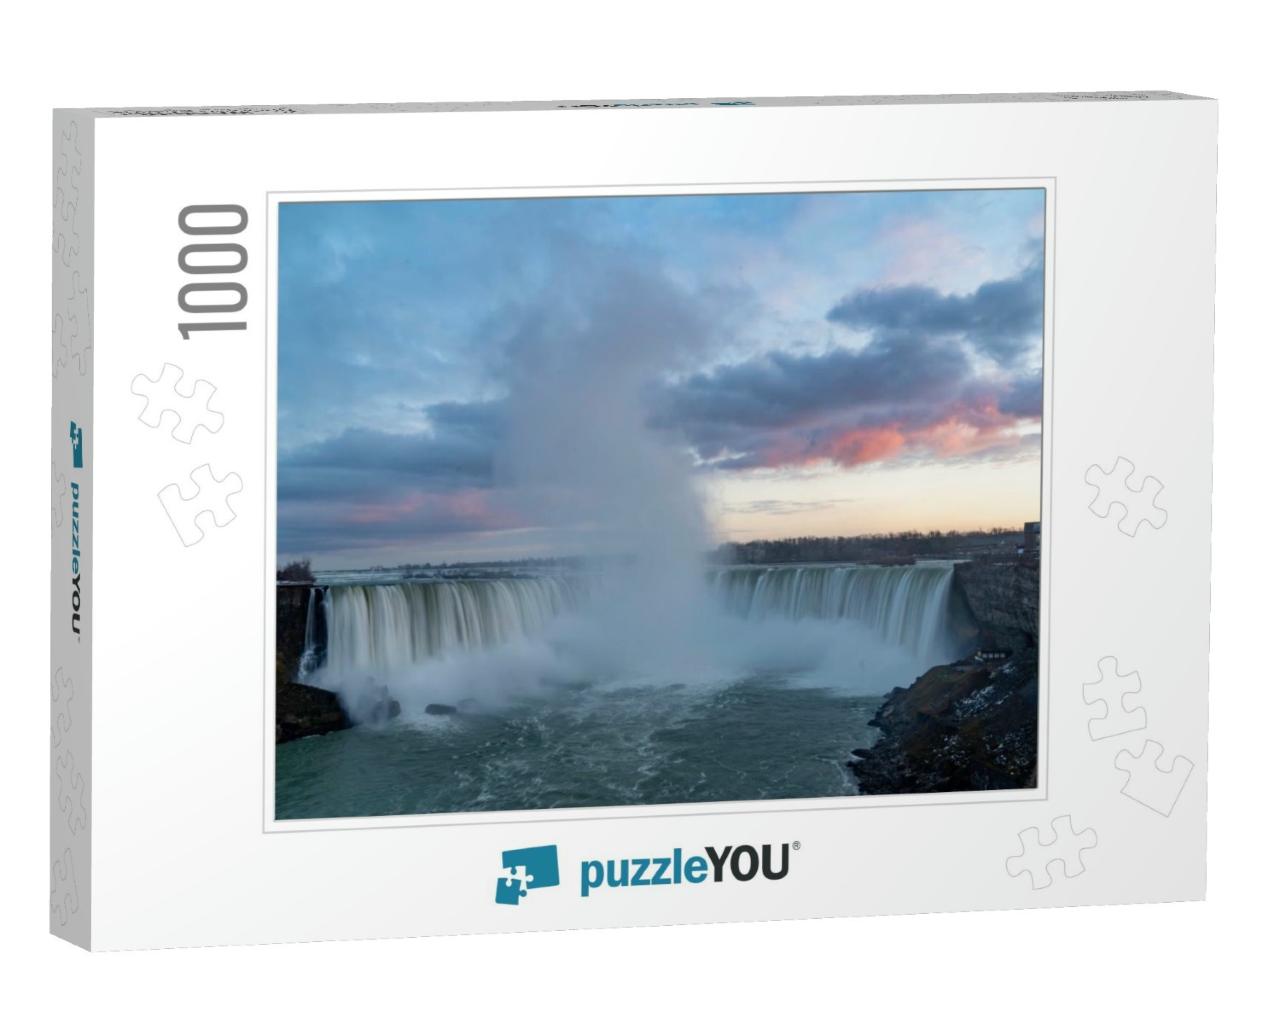 A Long Exposure Photograph of Niagara Falls, Ontario with... Jigsaw Puzzle with 1000 pieces